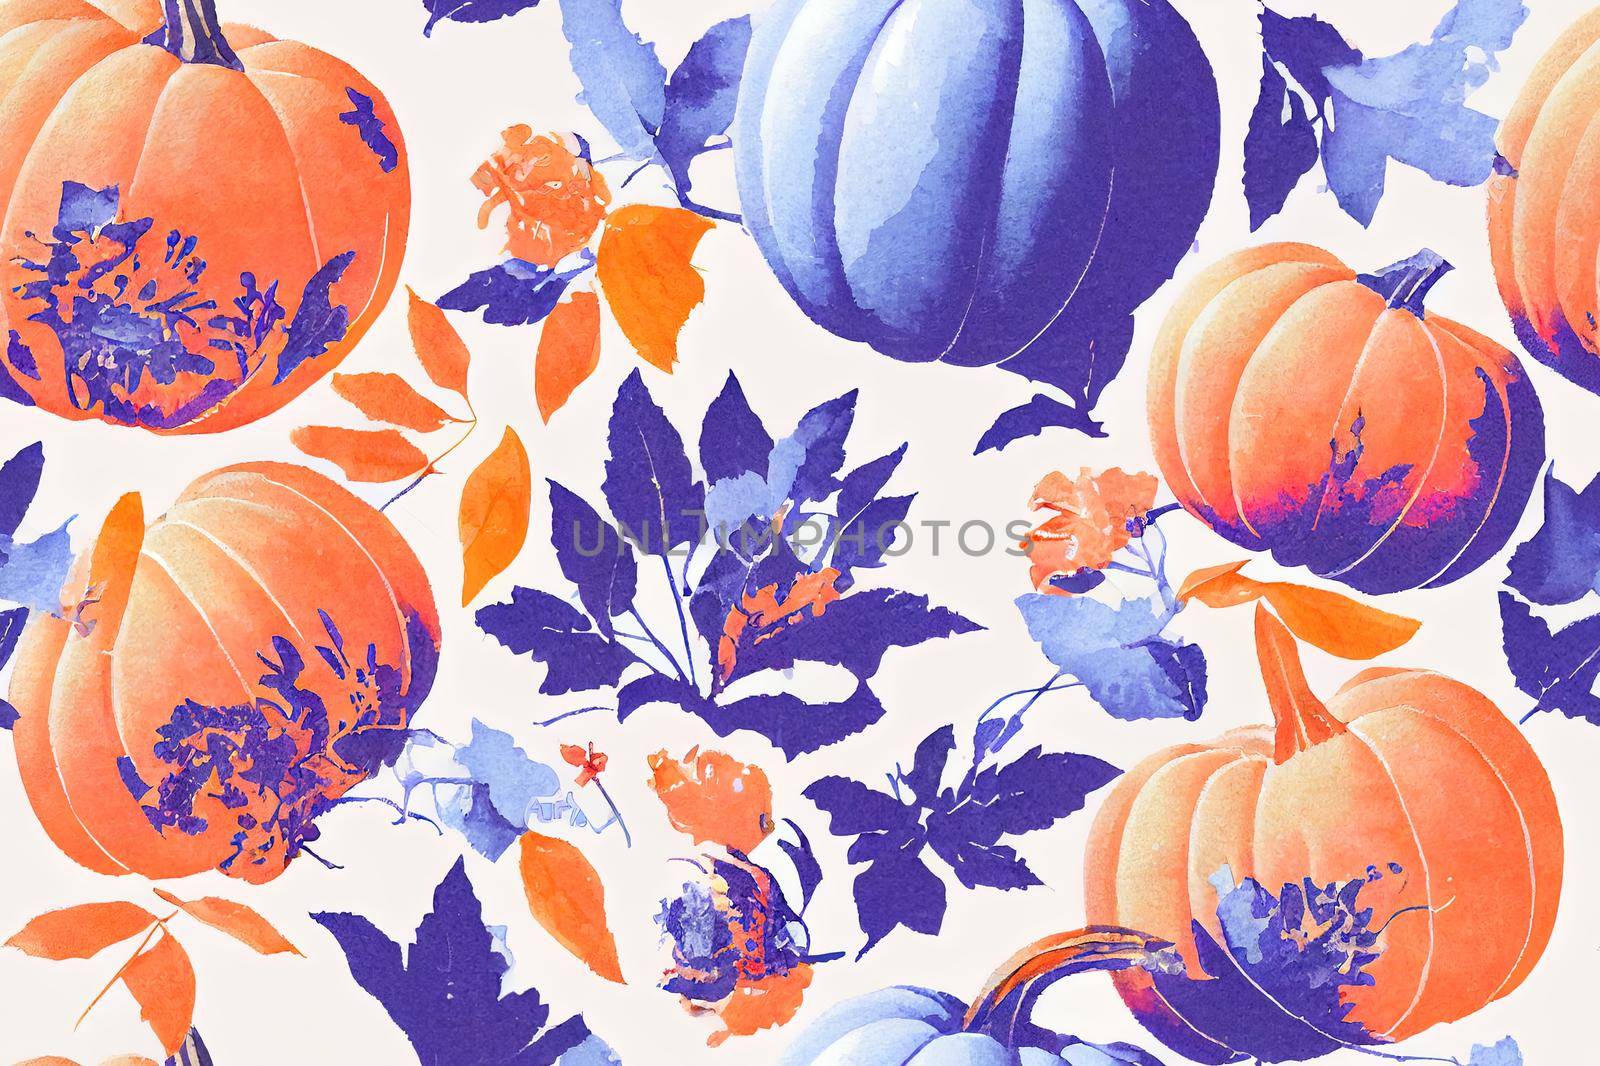 watercolour floral pumpkin seamless repeat pattern, in orange, blue and purple on a white background, perfect for scrapbooking, paper crafts. High quality illustration